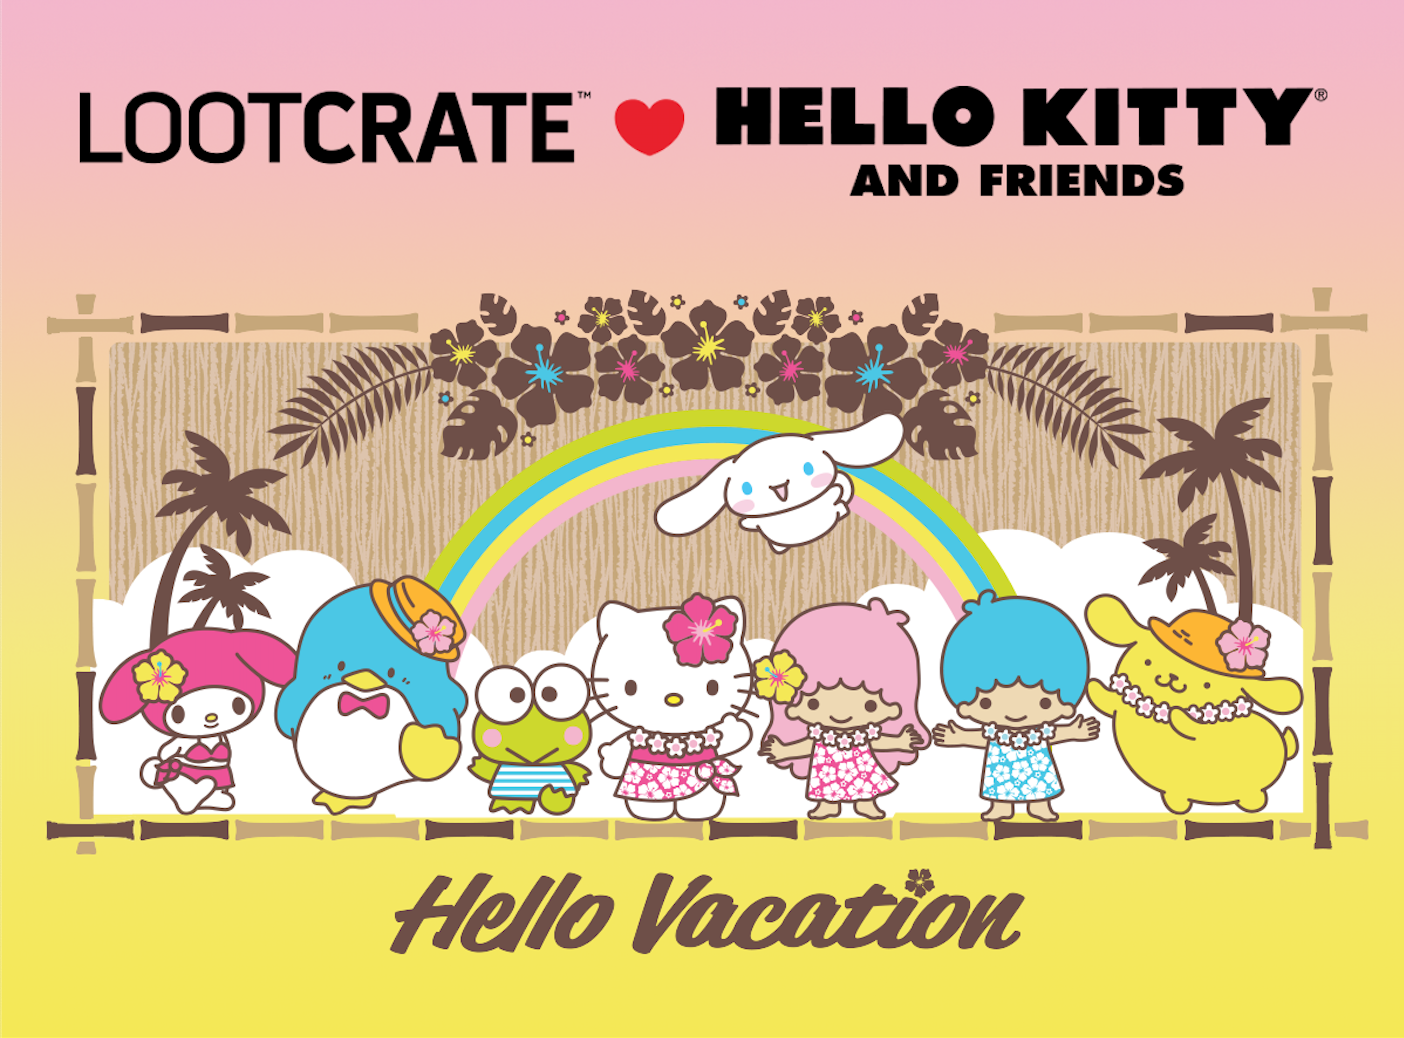 THEME REVEAL: Check Out The Newest Themes for Deadpool Club Merc And The Hello Kitty Crate!